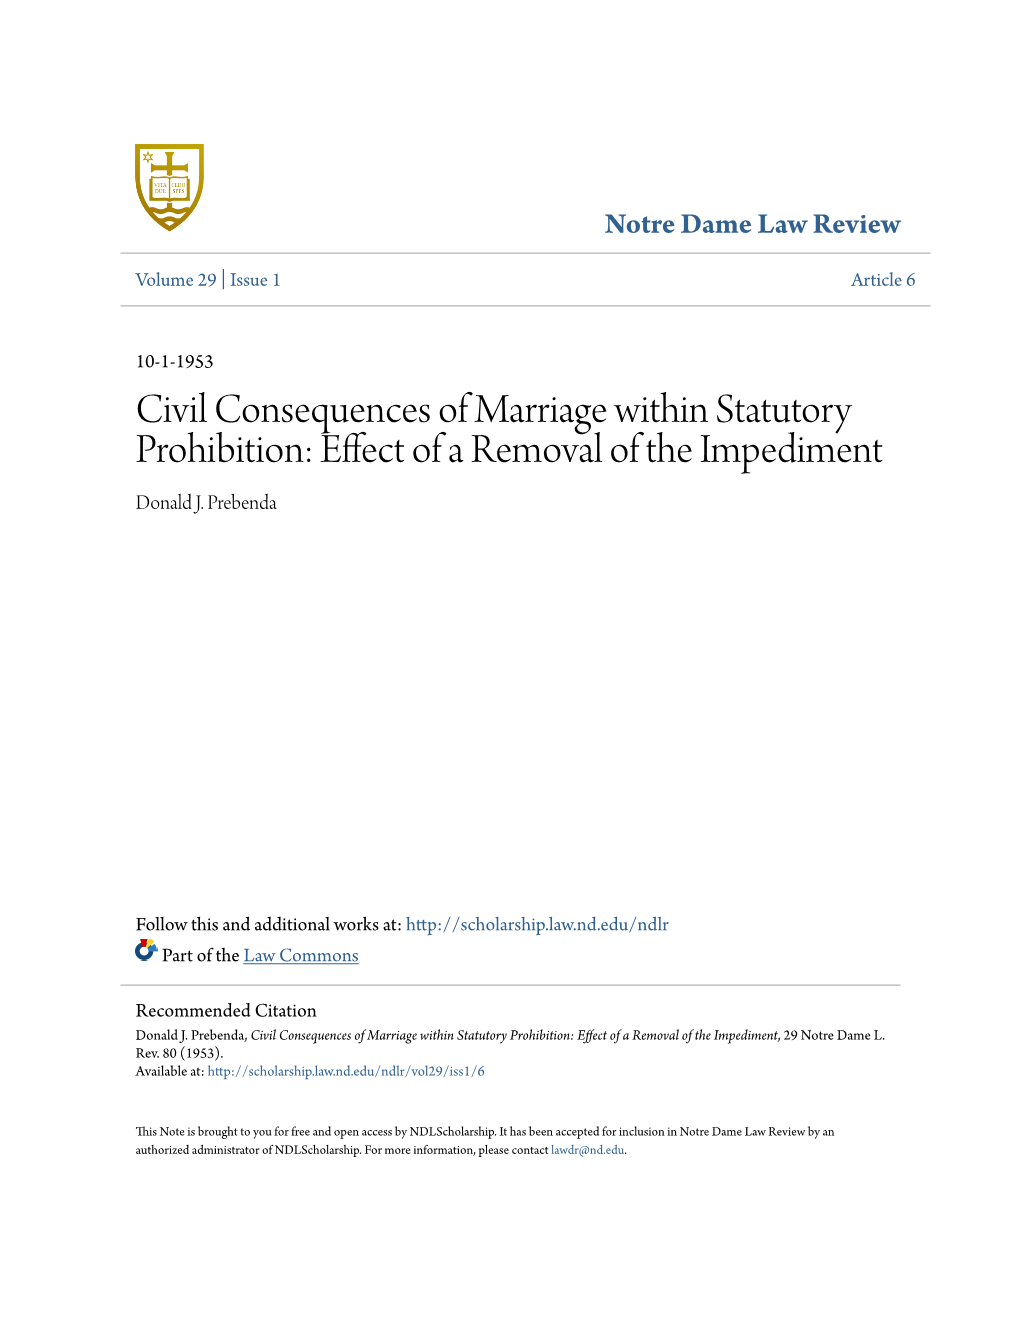 Civil Consequences of Marriage Within Statutory Prohibition: Effect of a Removal of the Impediment Donald J